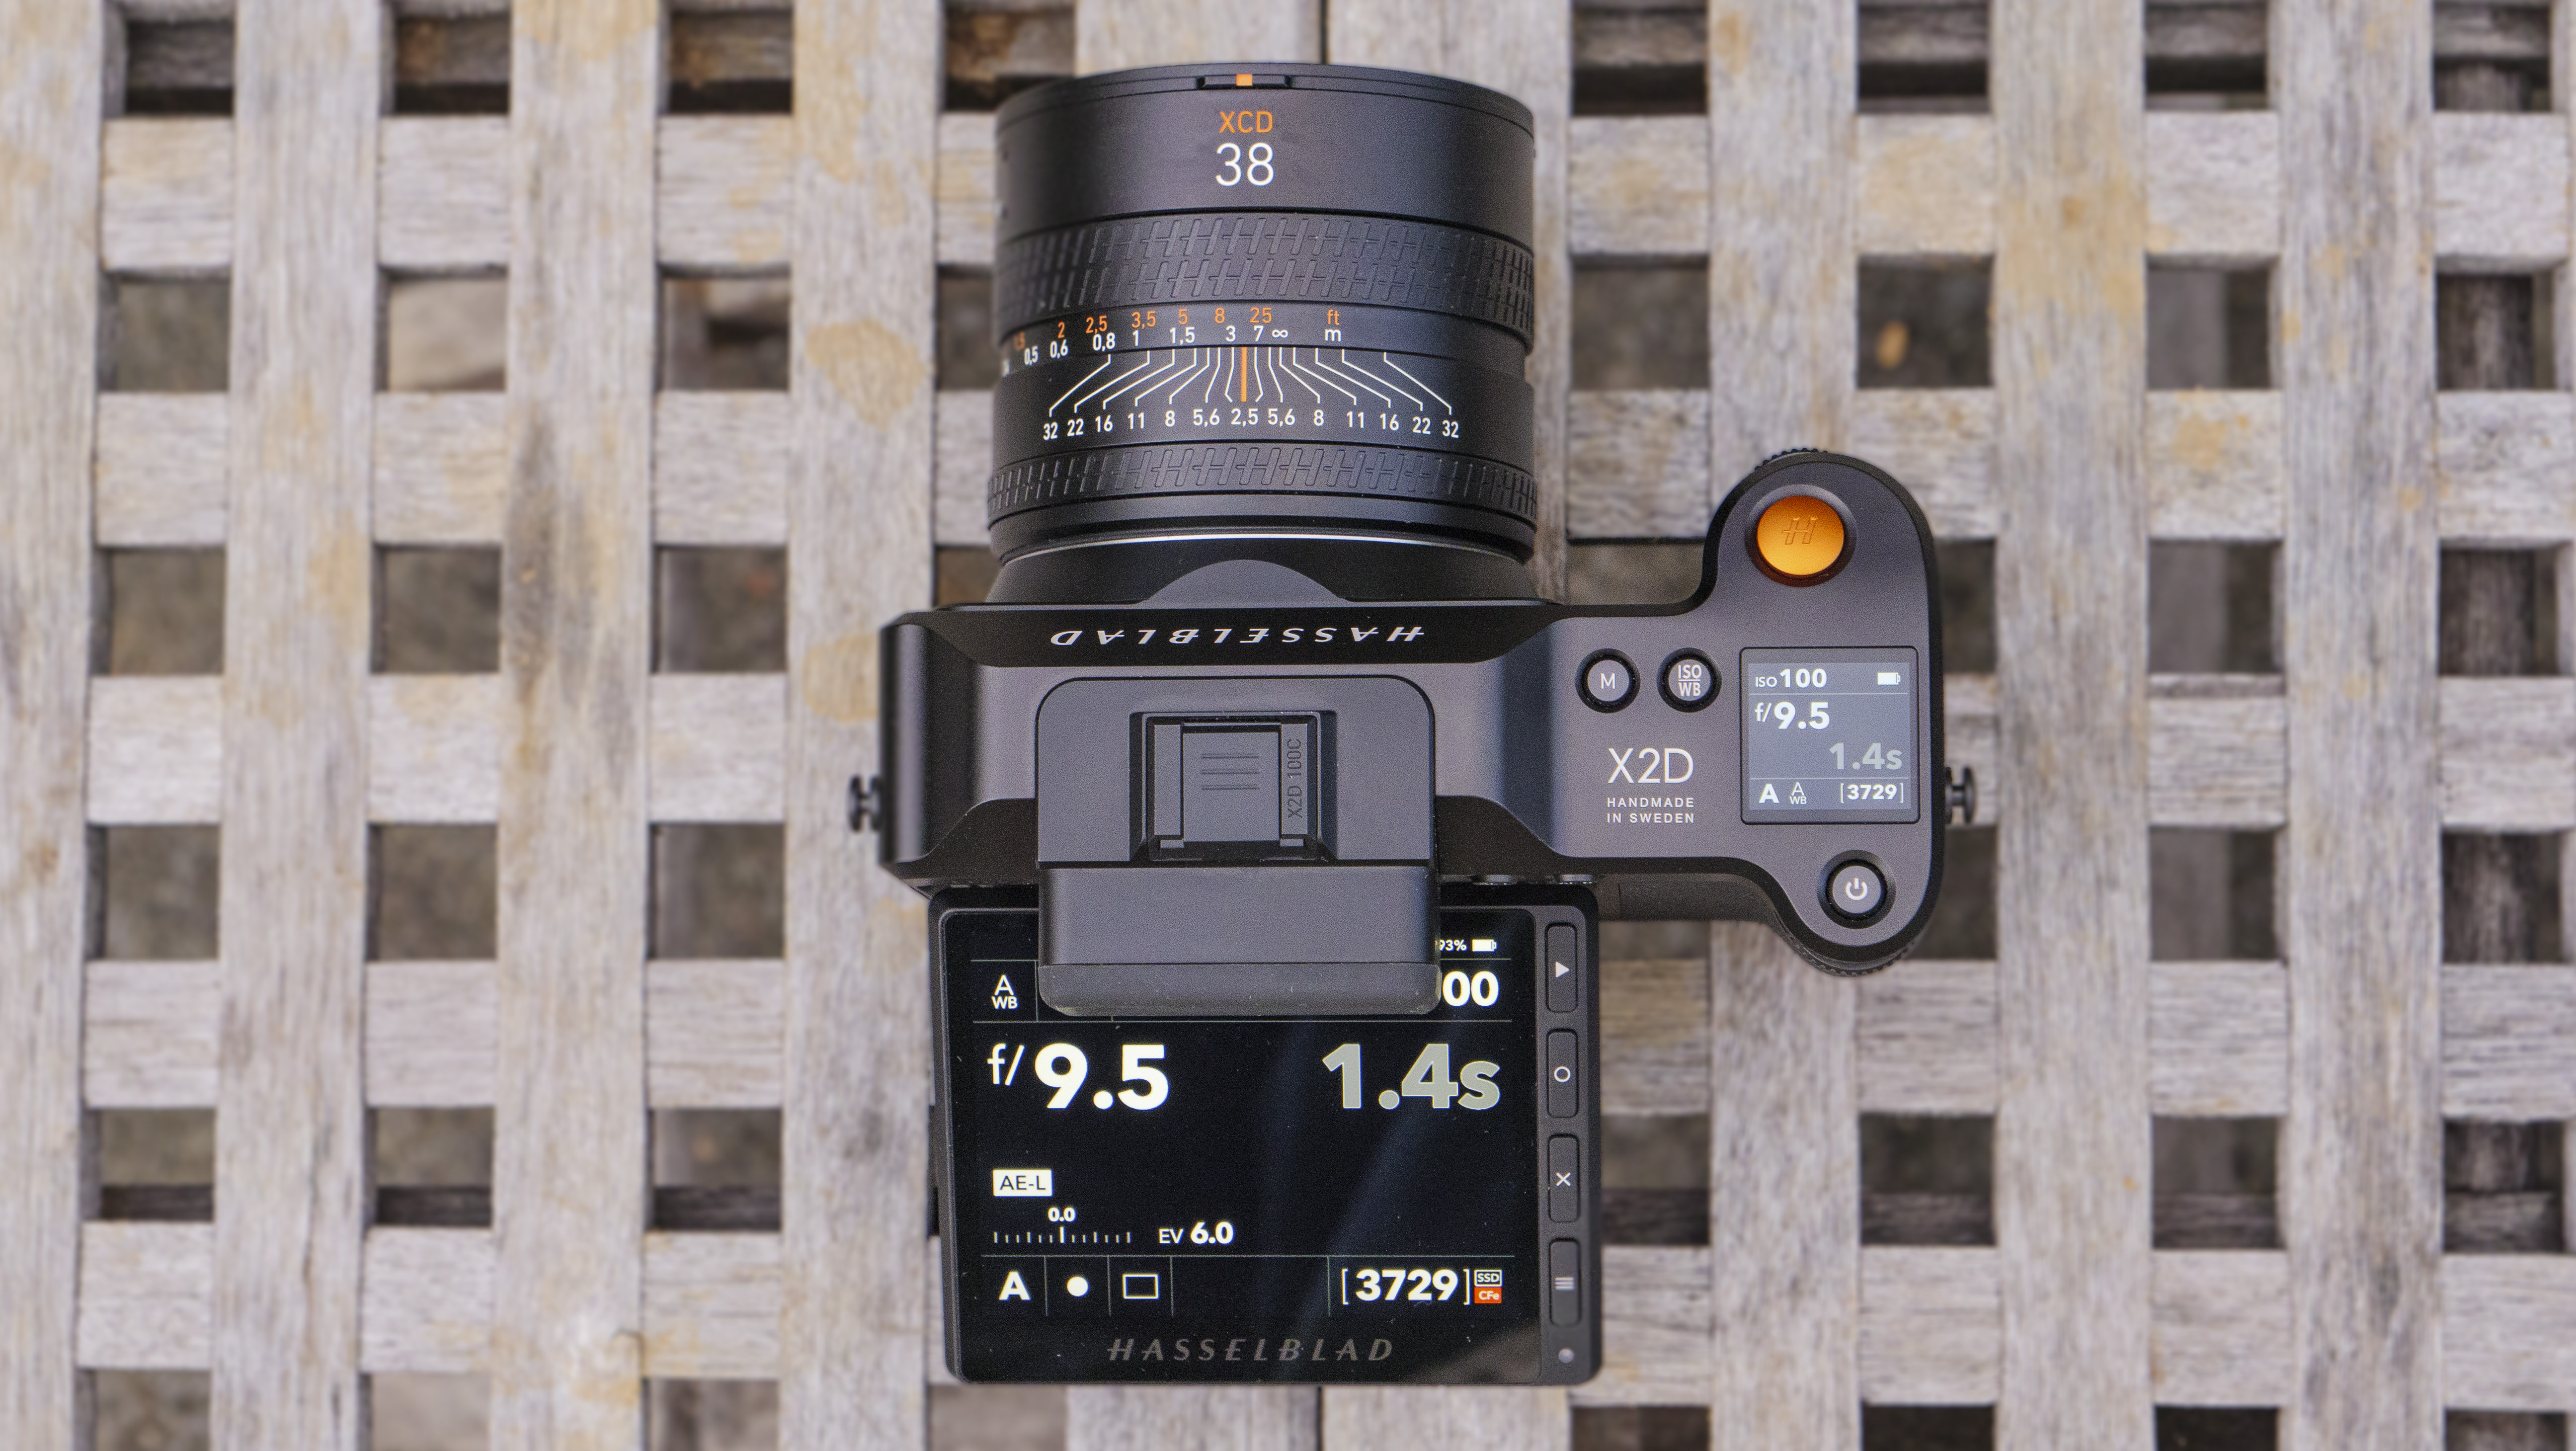 The Hasselblad X2D 100C camera view of the top